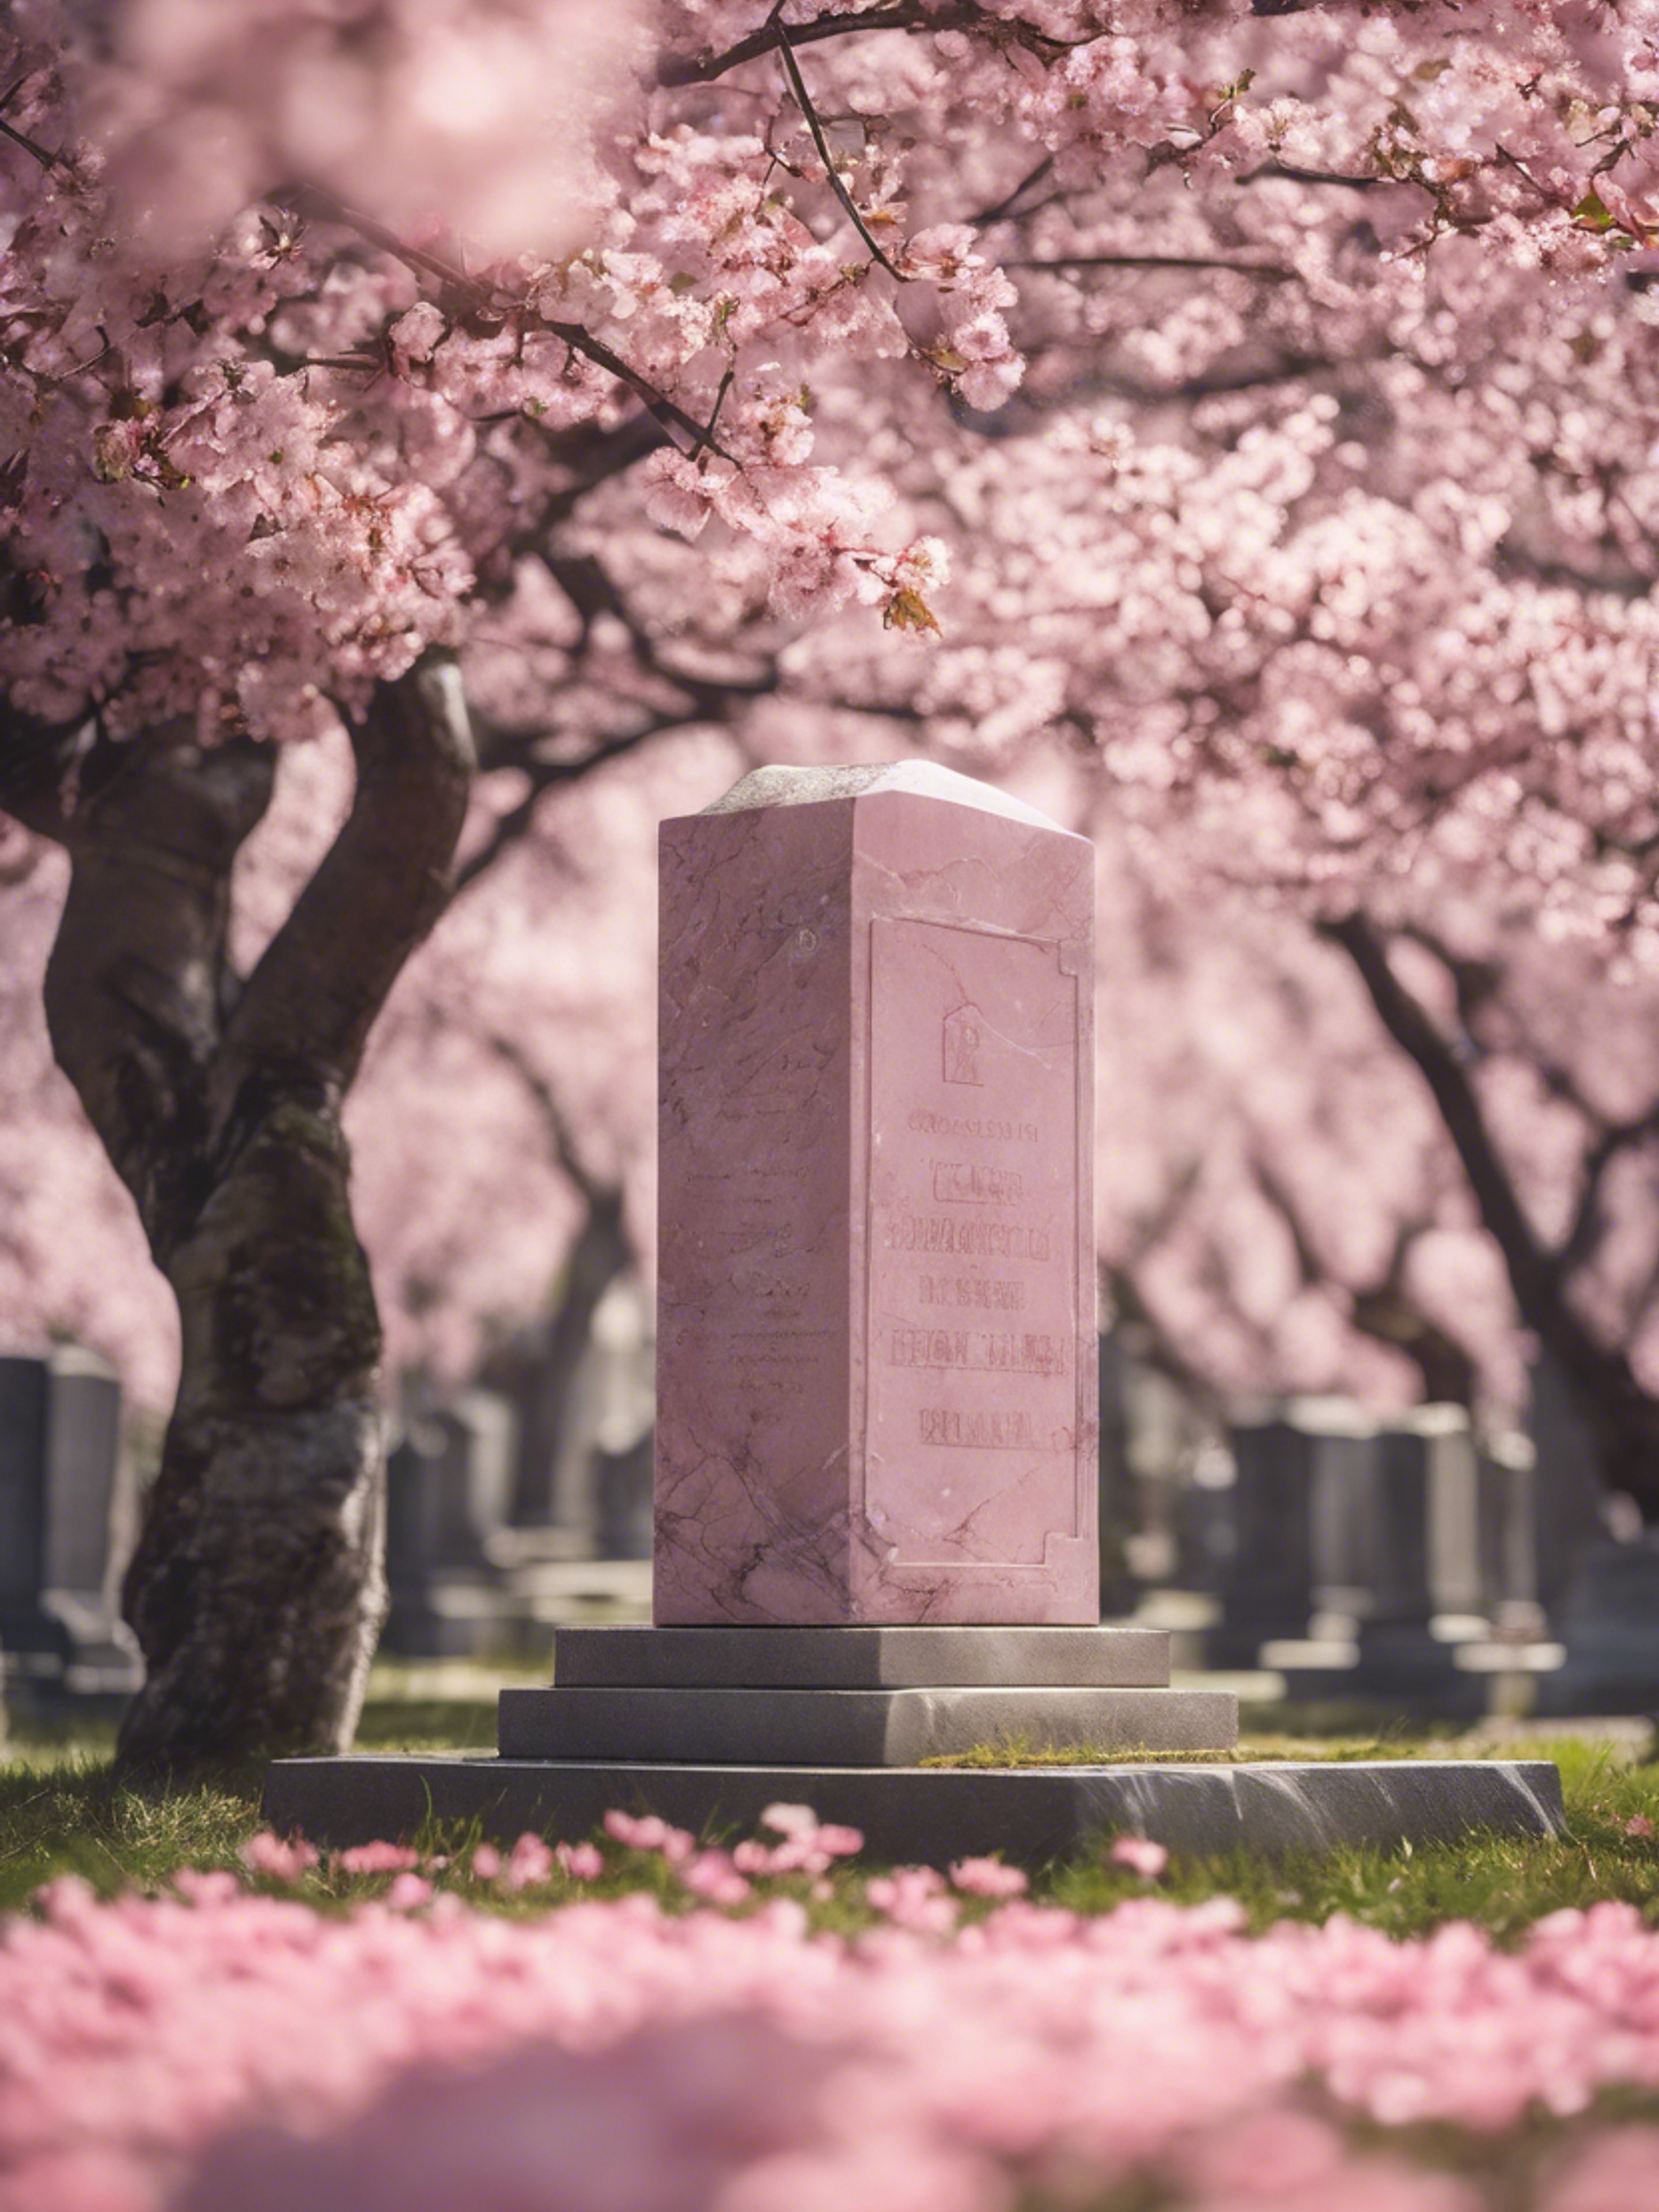 Pink marble headstone surrounded by blooming cherry blossom trees in a tranquil cemetery. Wallpaper[6605d21f56504ecfad88]